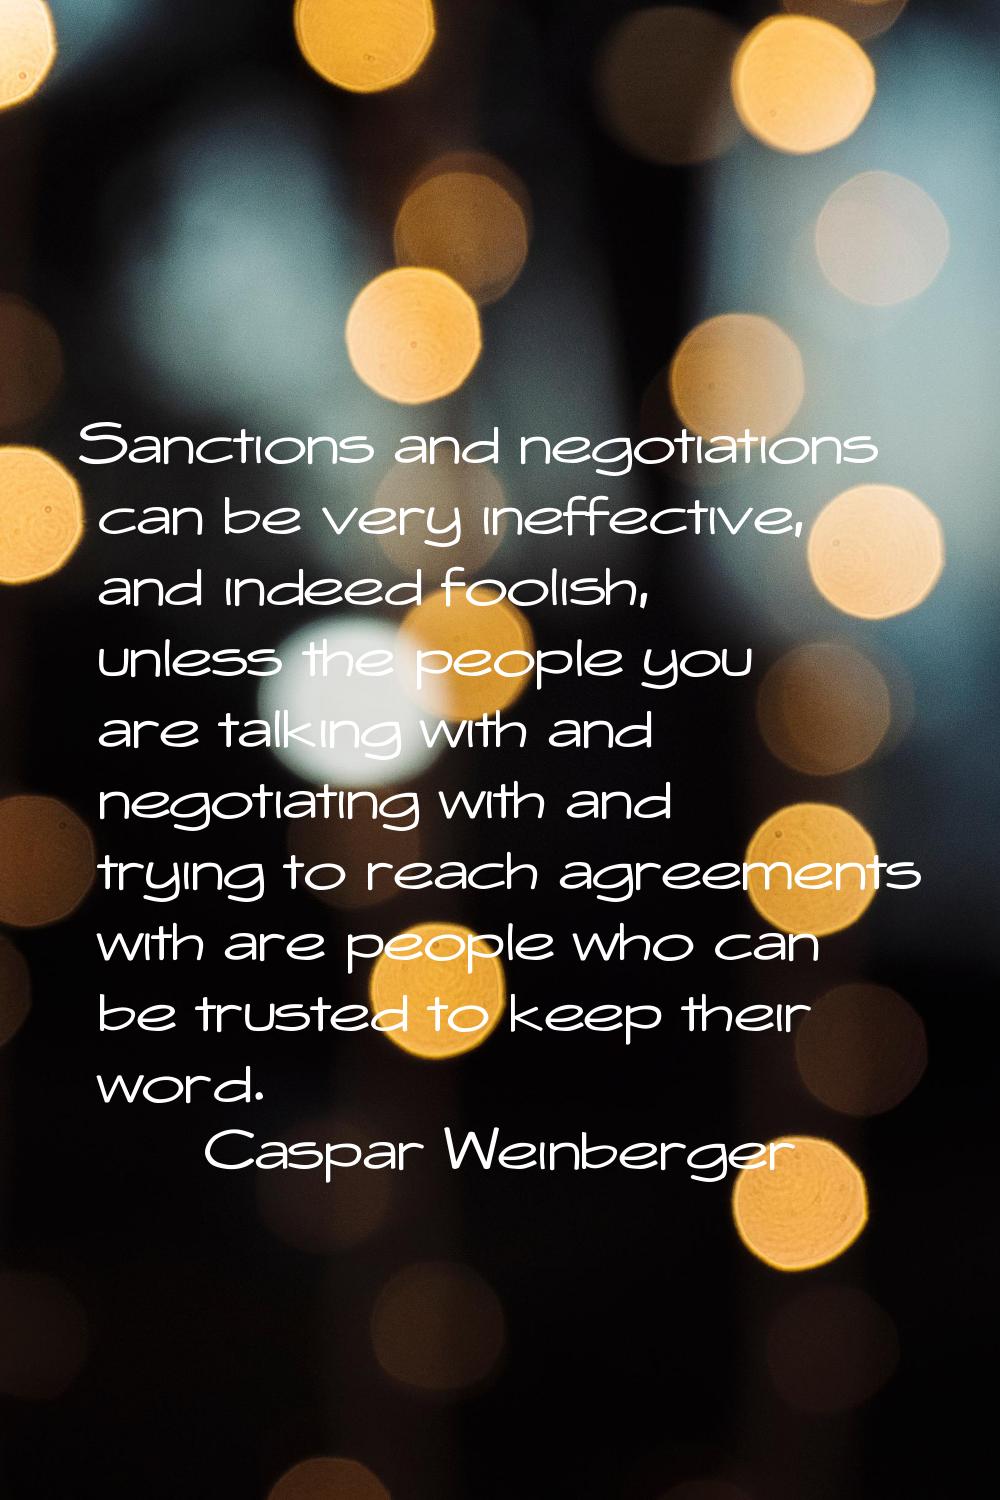 Sanctions and negotiations can be very ineffective, and indeed foolish, unless the people you are t